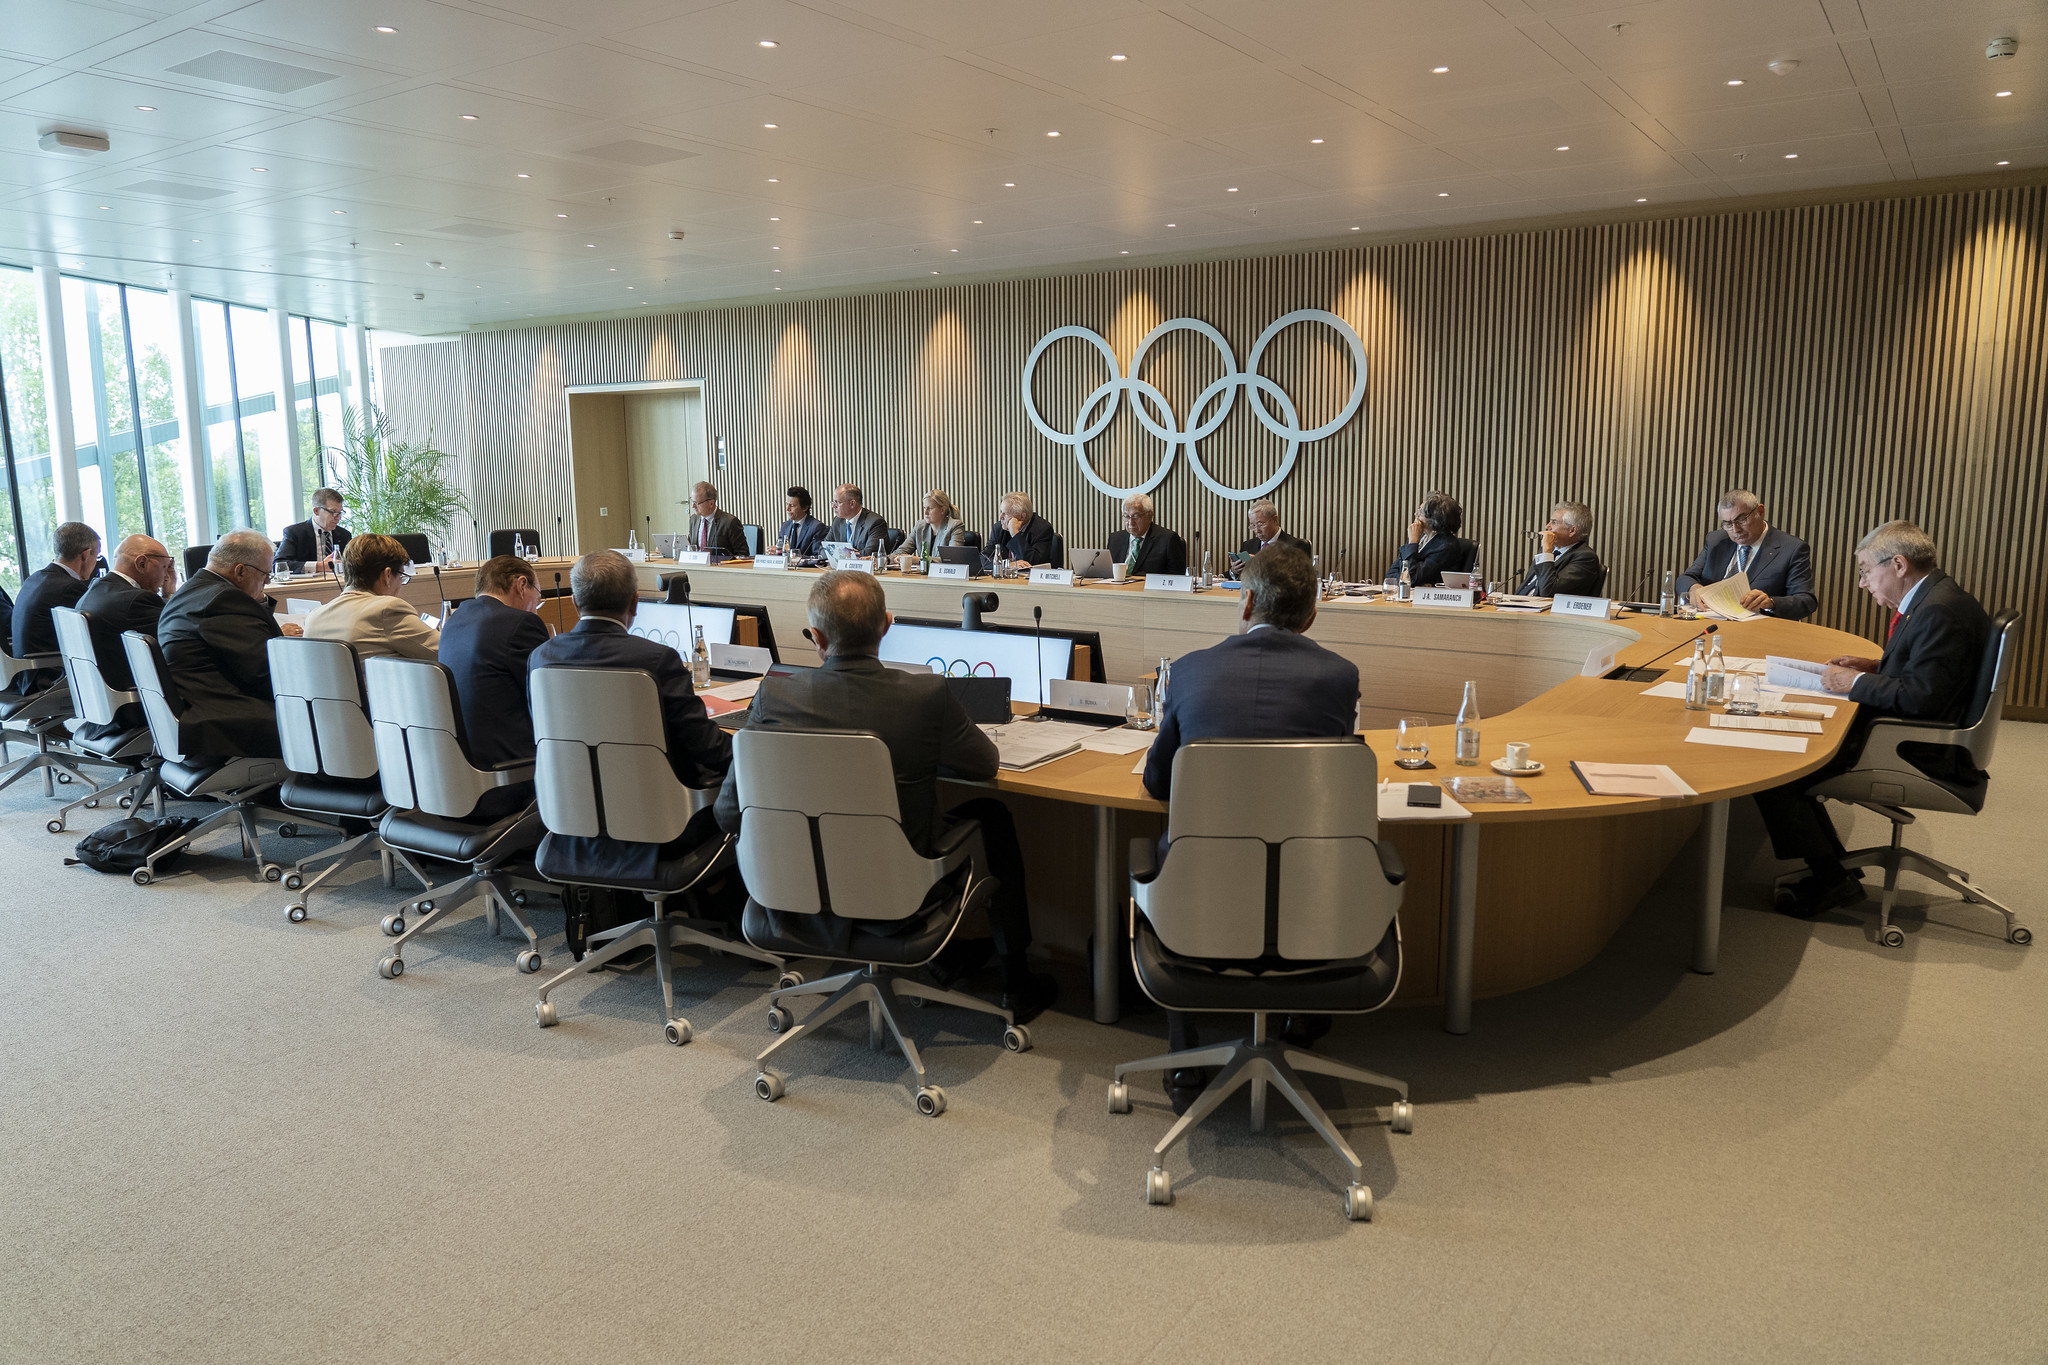 The International Olympic Committee's Executive Board cited good governance among the reasons for recommending the Alliance of Independent Recognised Members of Sport for full recognition ©IOC Media 